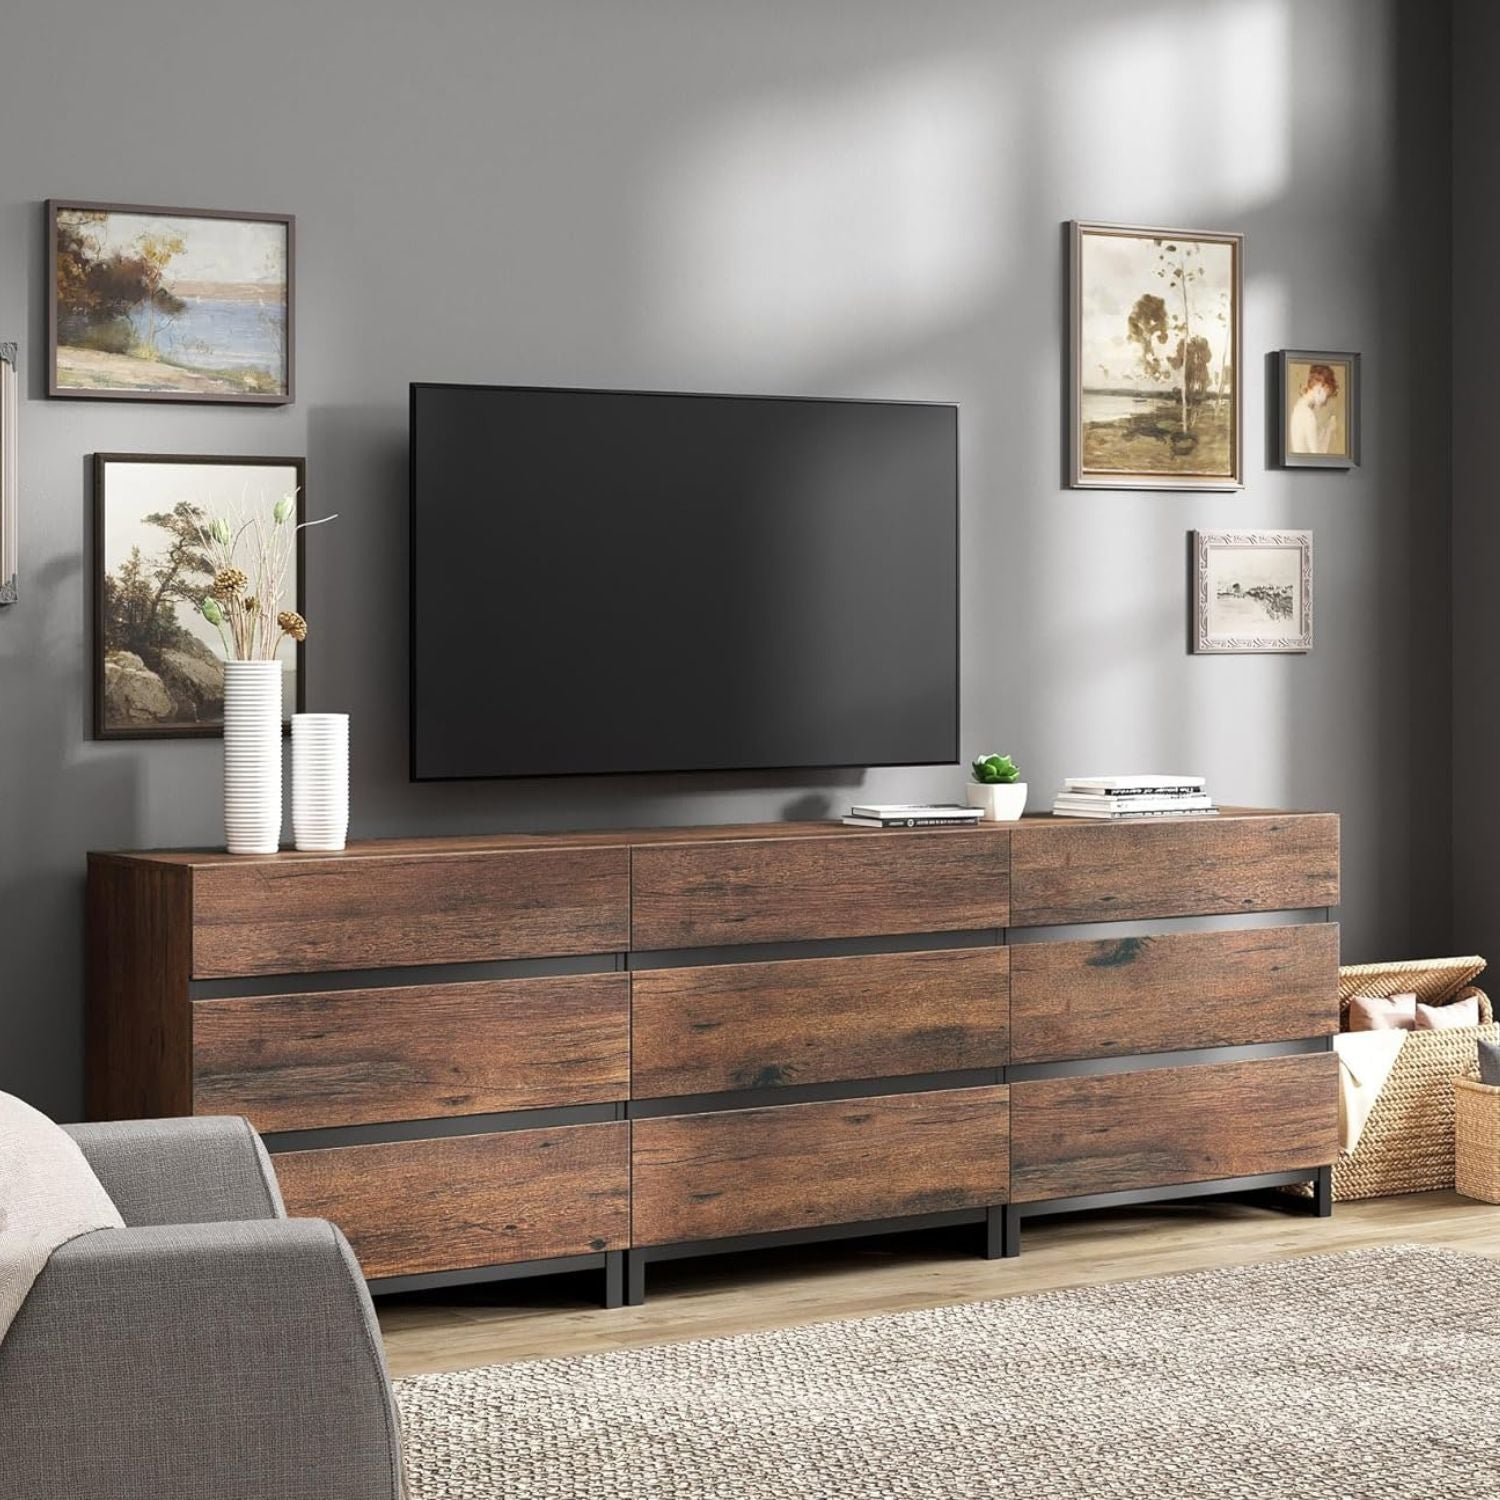 WAMPAT Modern TV Stand for TVs up to 42 inch, Entertainment Center TV Console with 3 Drawers & Metal Base, Media Console for Living Room, Bedroom, Brown